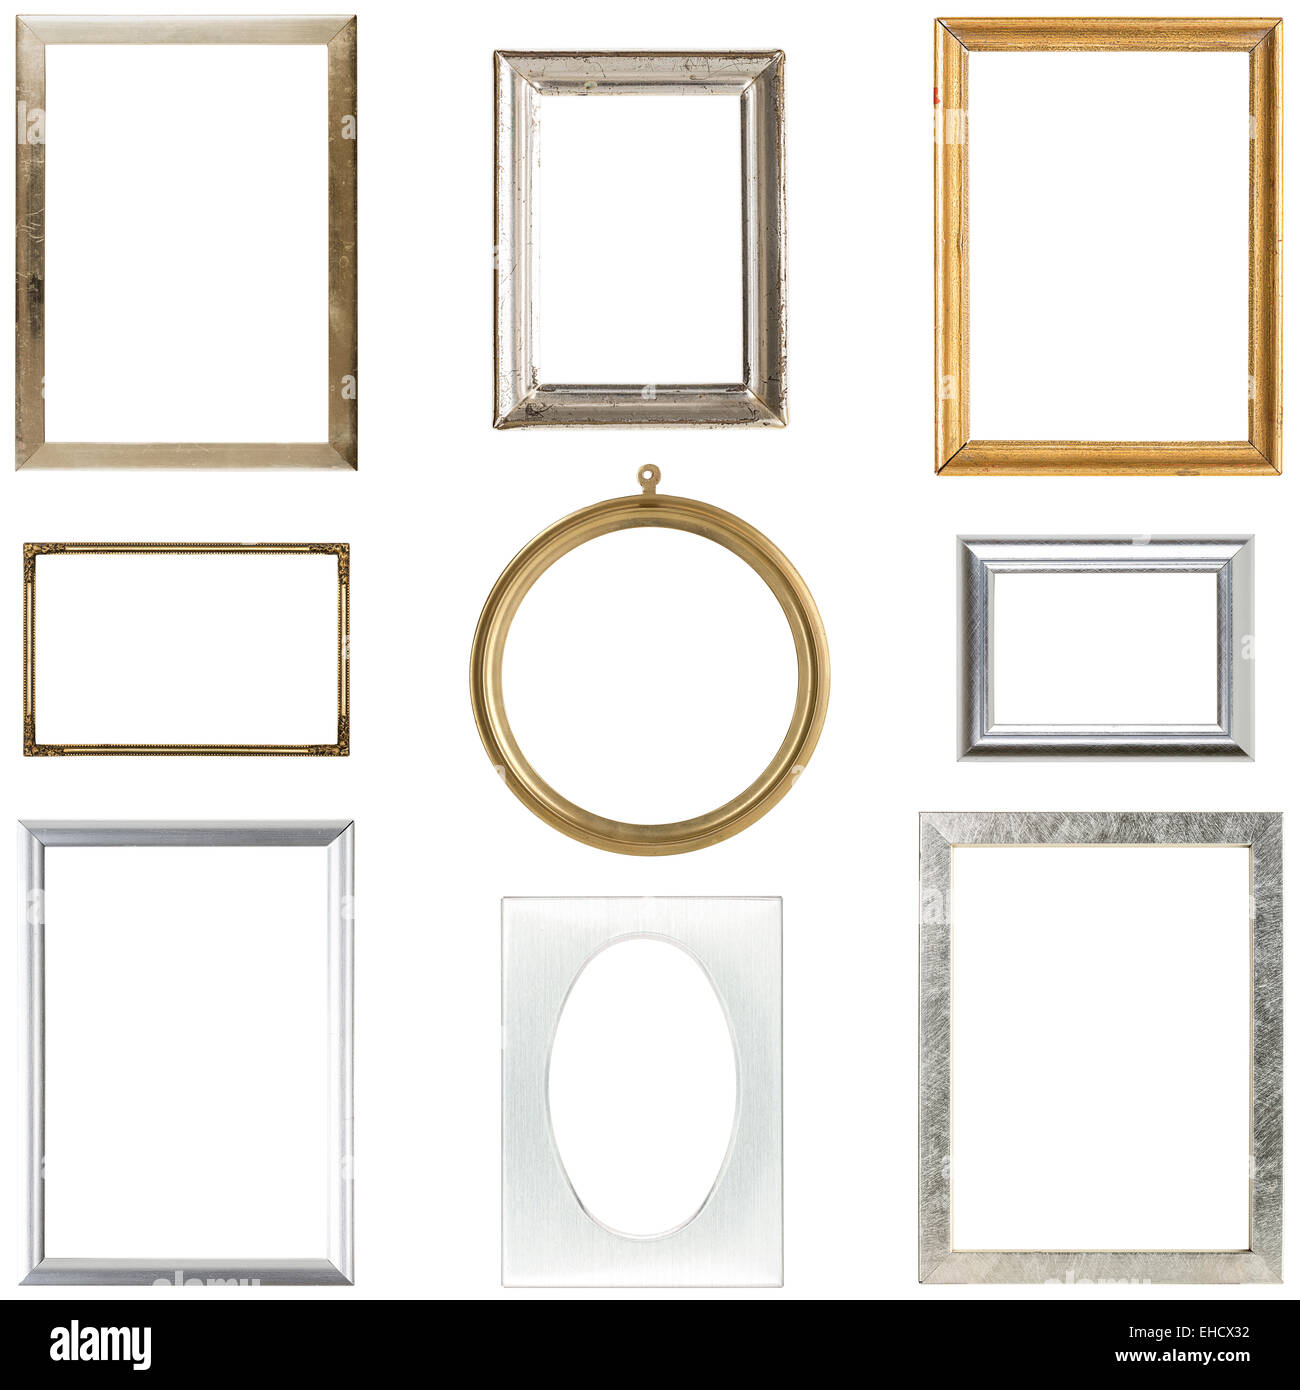 collection of old metallic picture frames, isolated on white Stock Photo